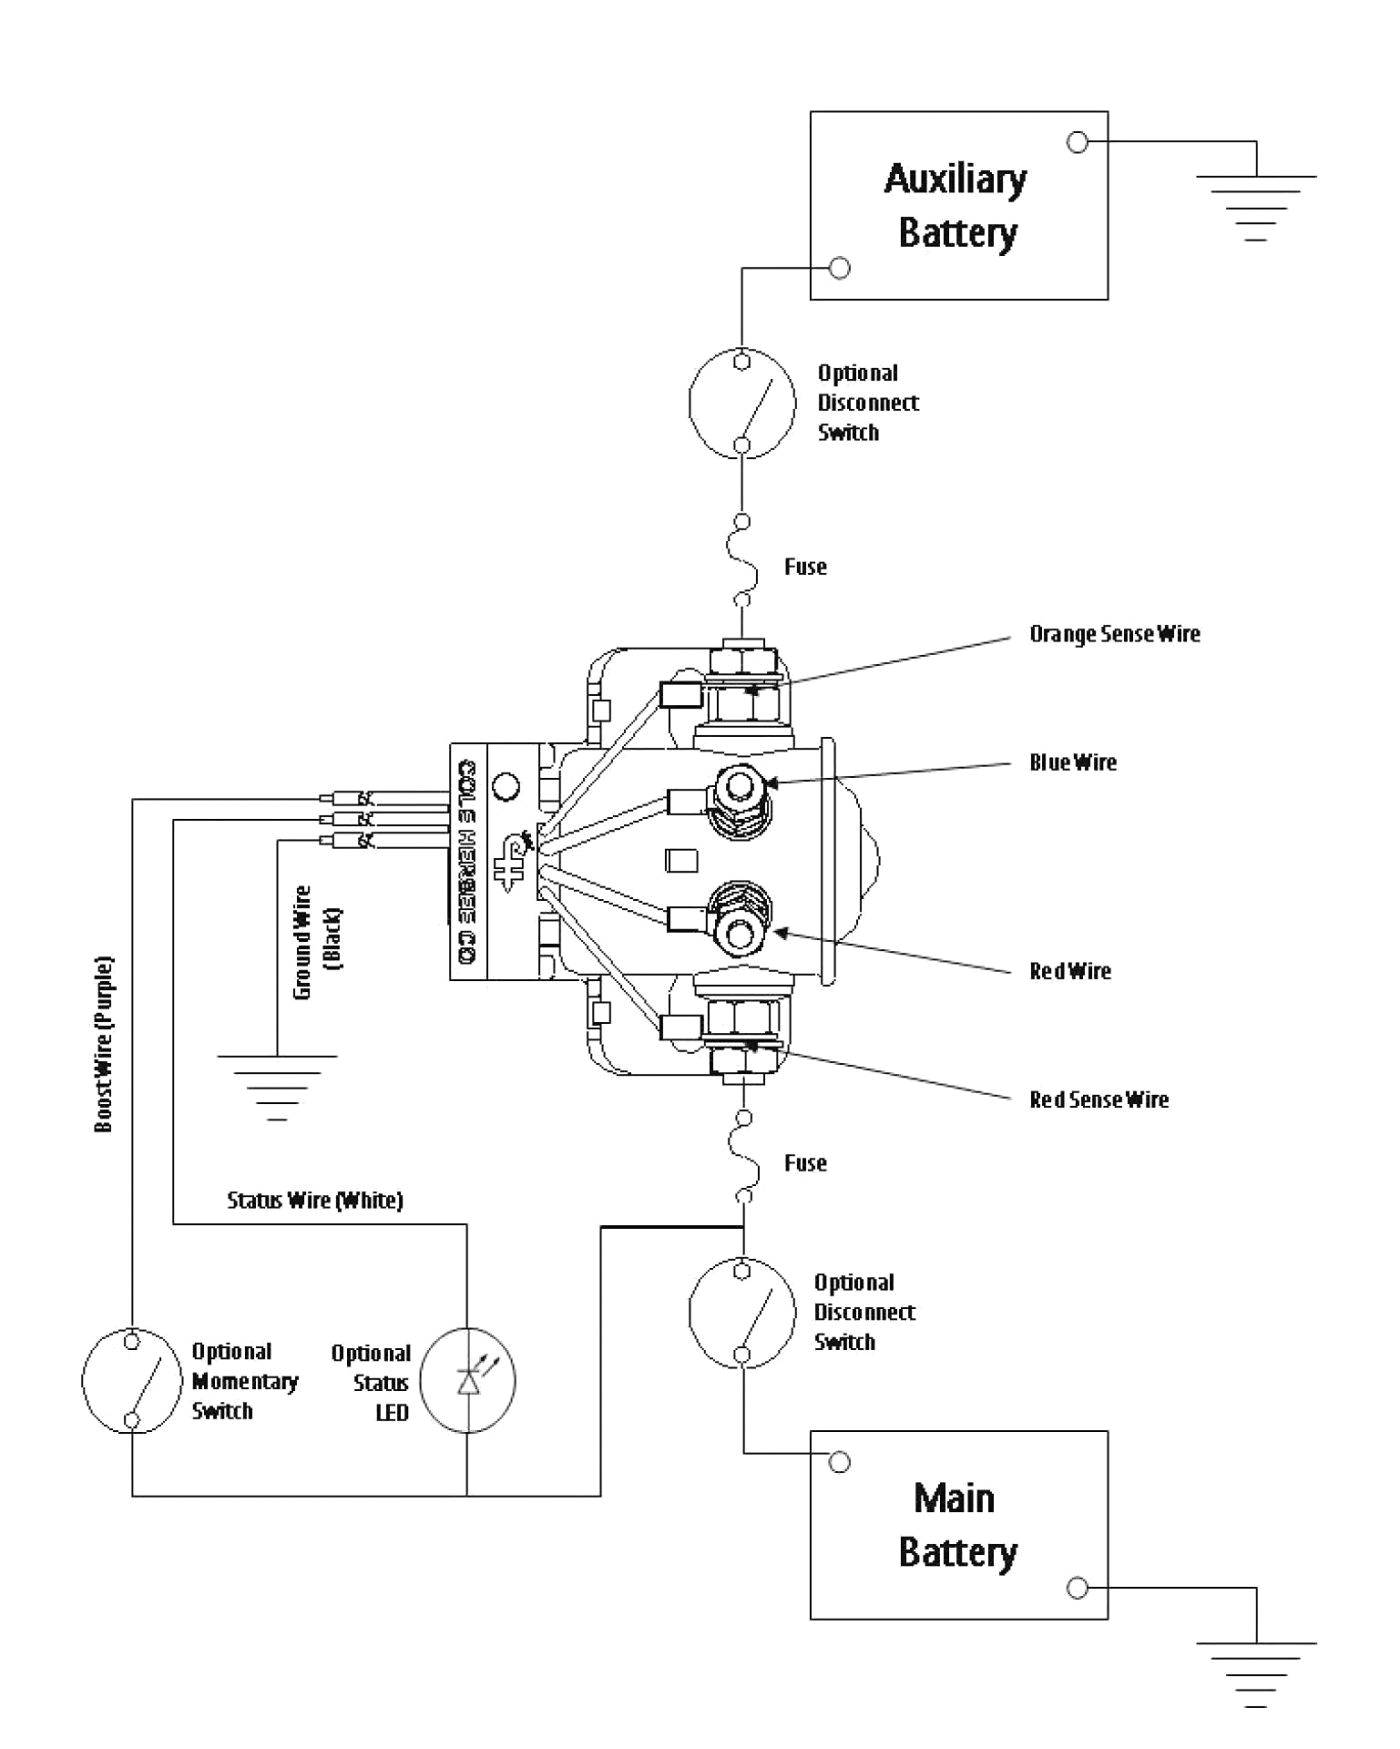 awesome battery isolator wiring diagram incredible jpg